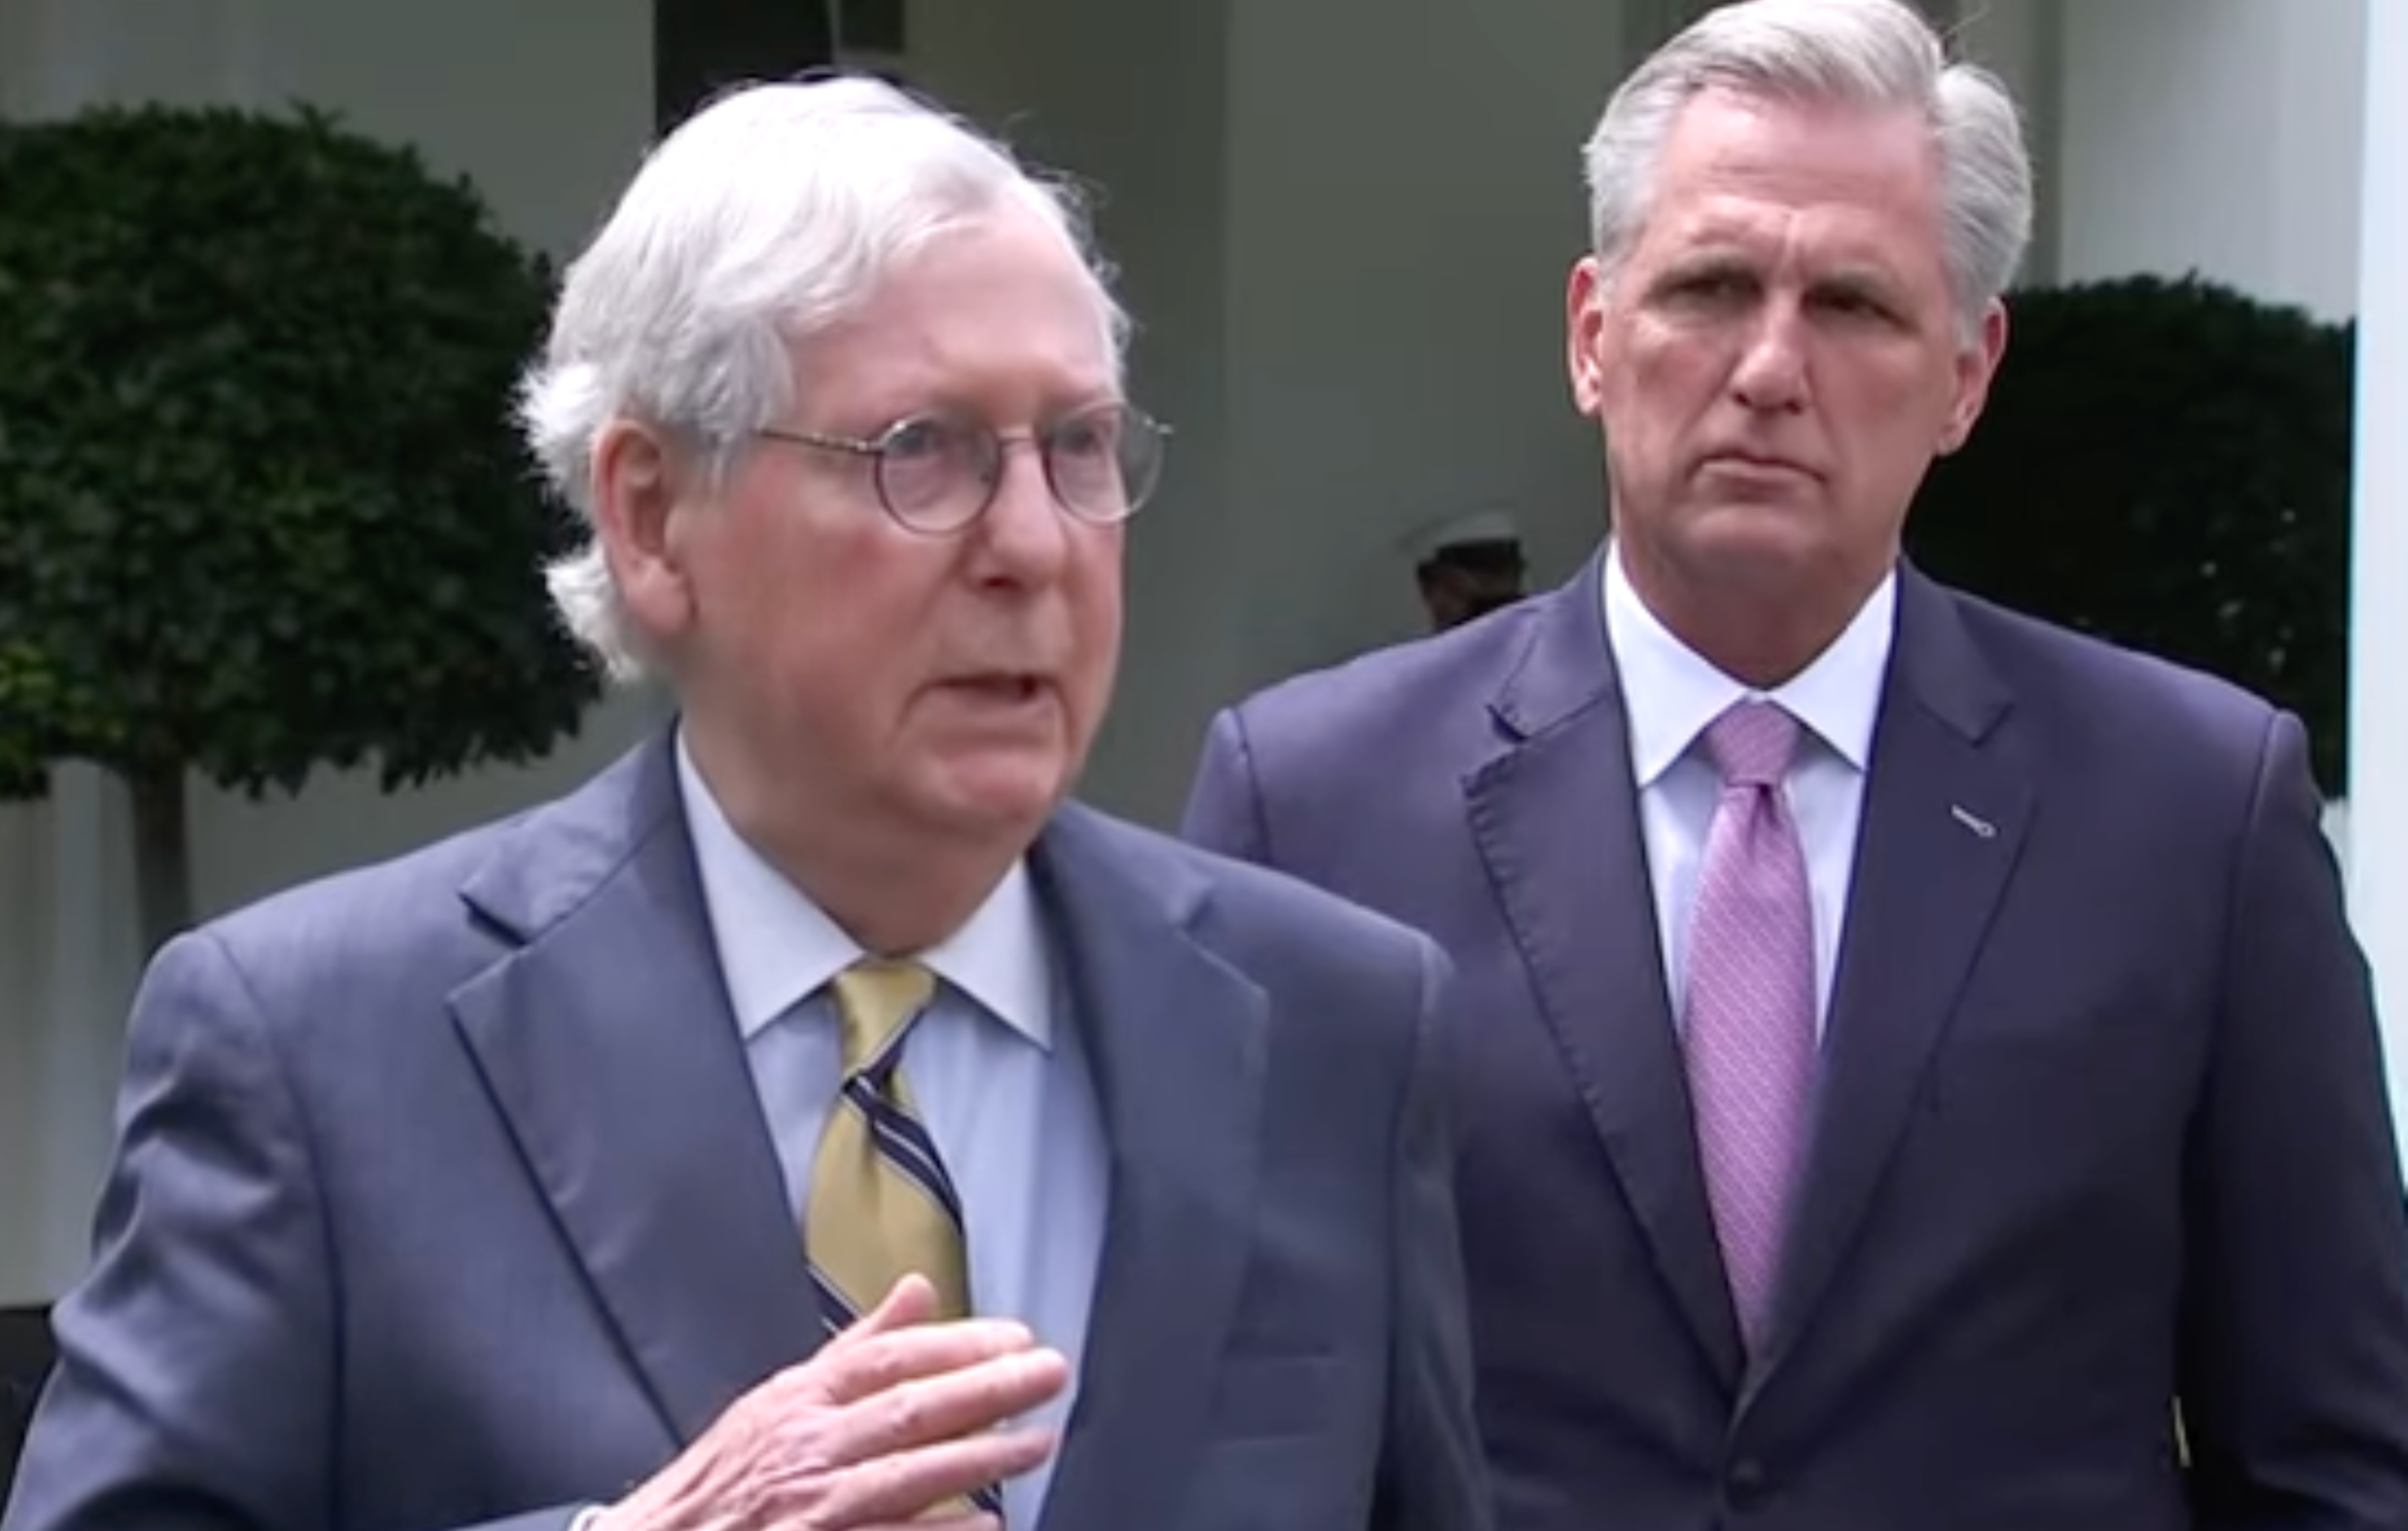 McCarthy and McConnell